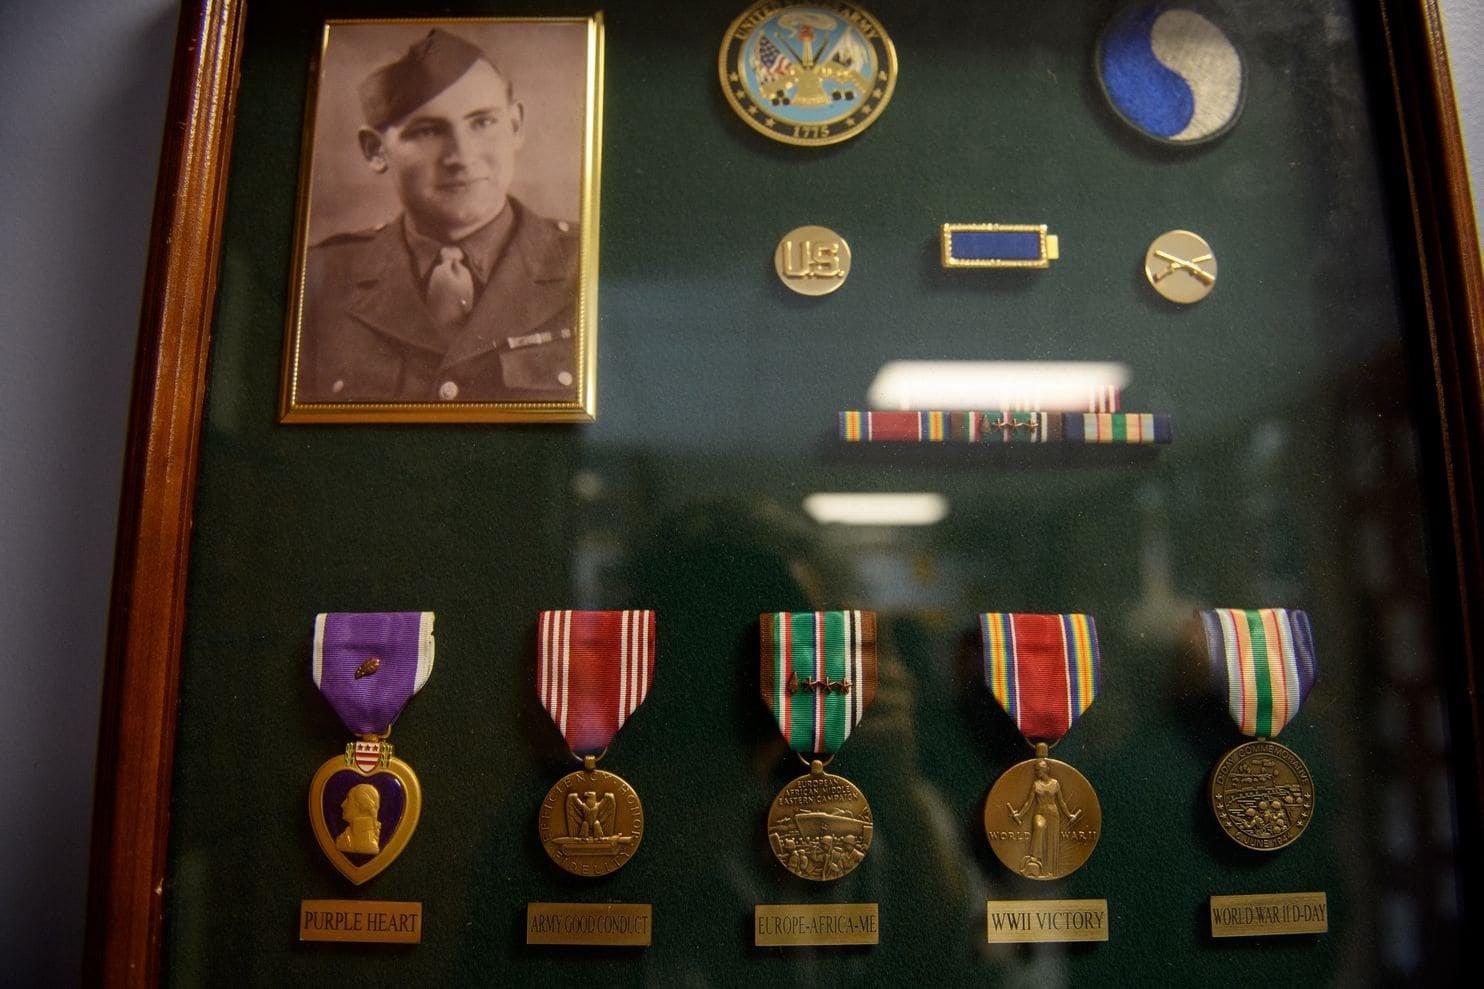 Earll was wounded twice and received two Purple Hearts in World War II